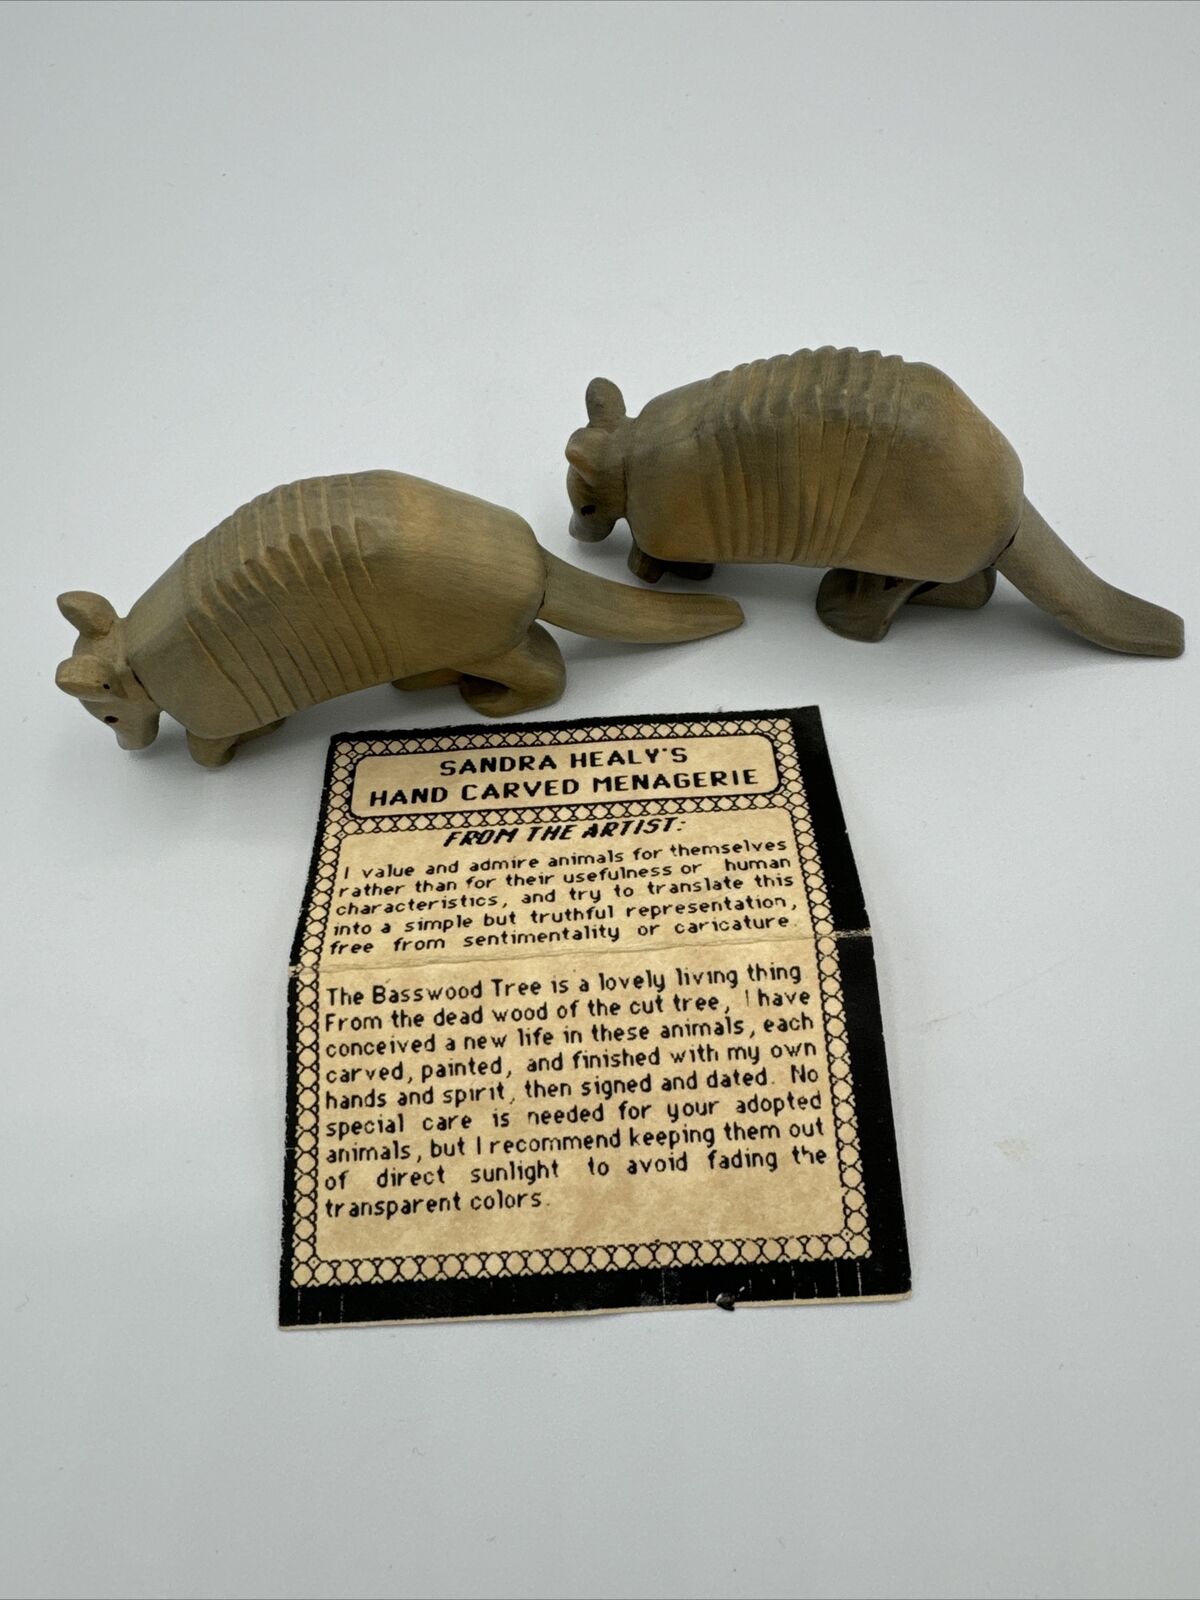 2 Hand crafted Armadillos By Sandra Healy- Made From Basswood Signed And Dated H